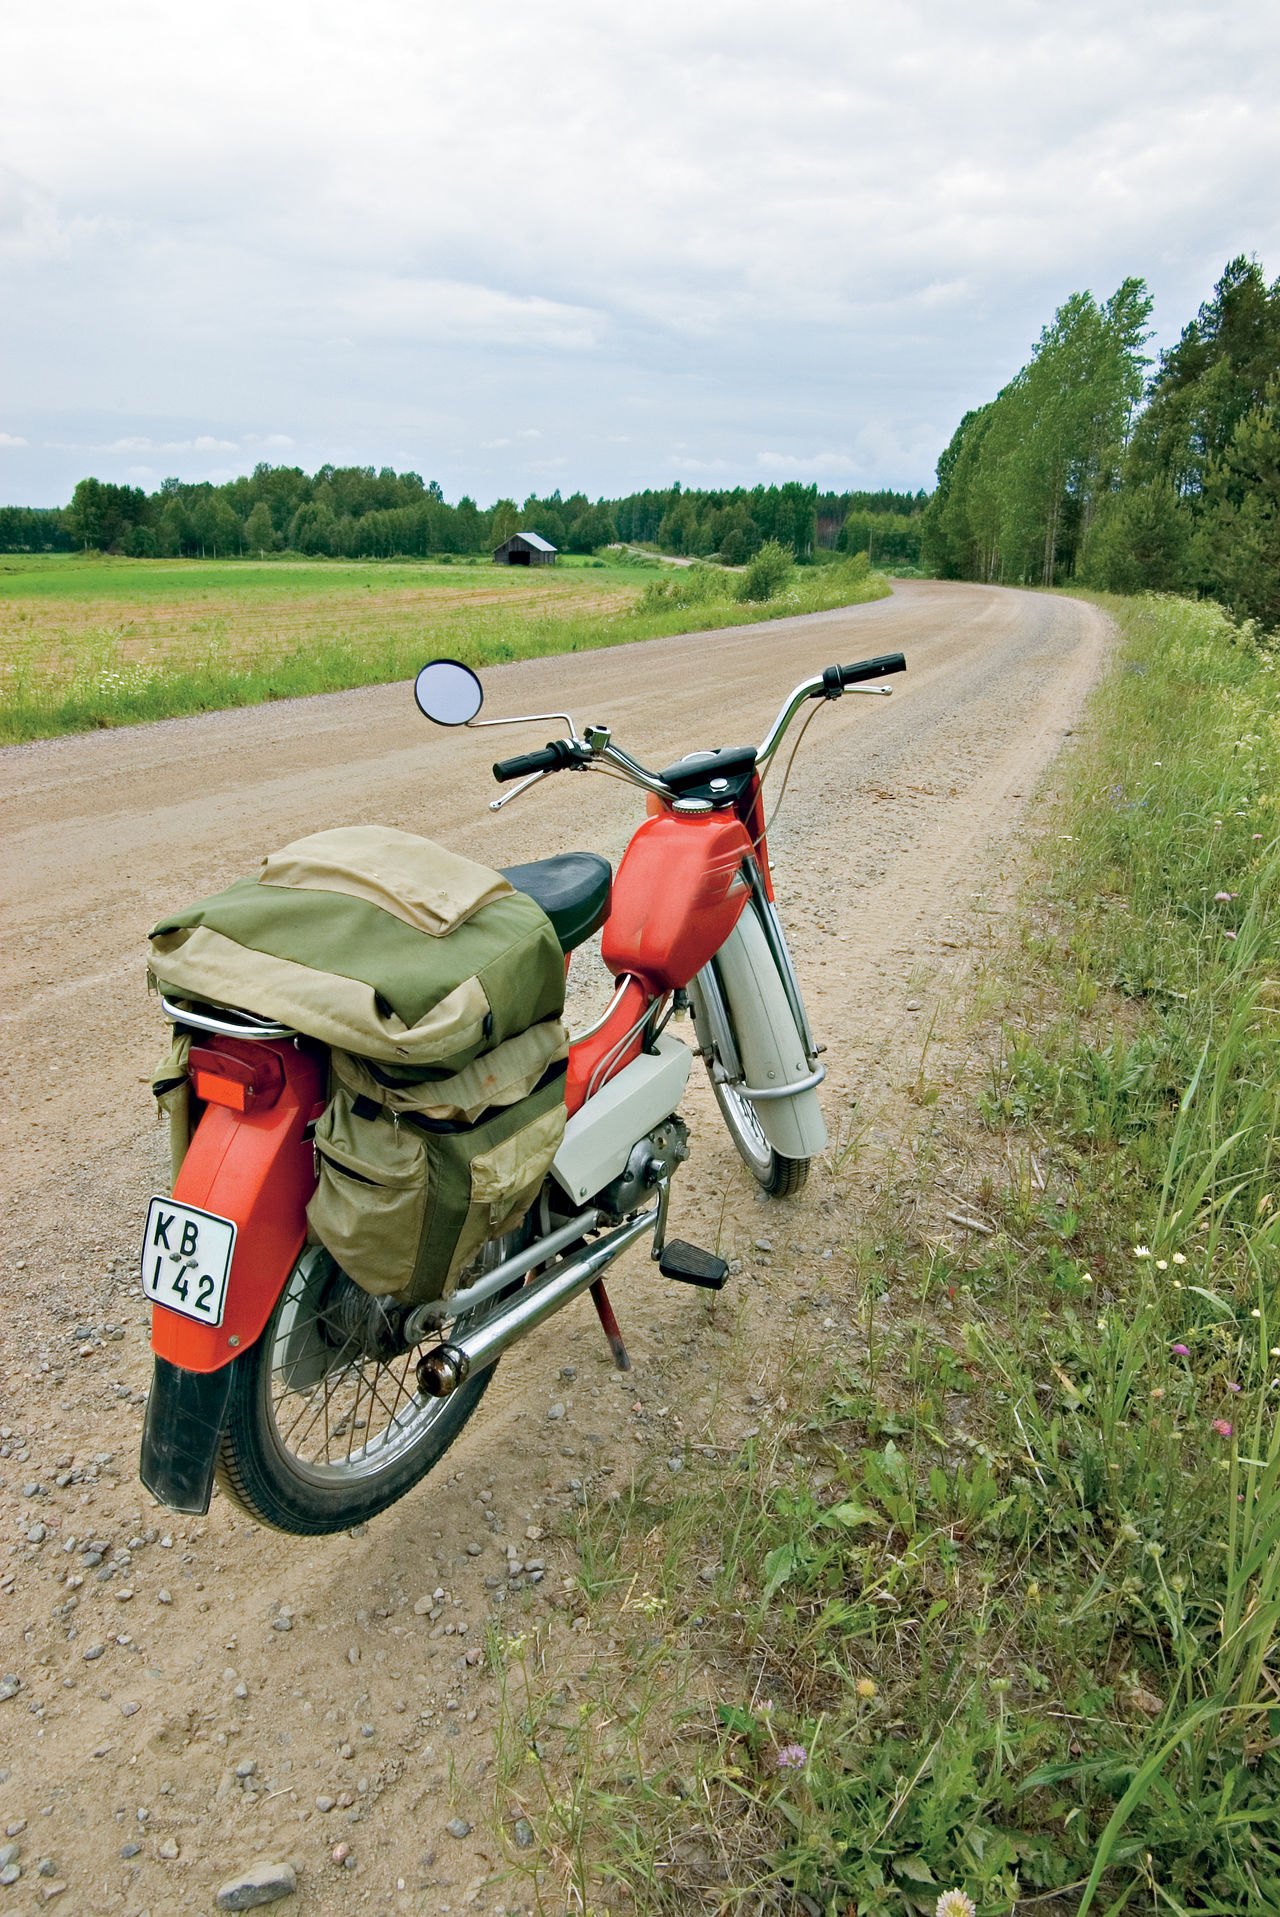 A classical finnish moped